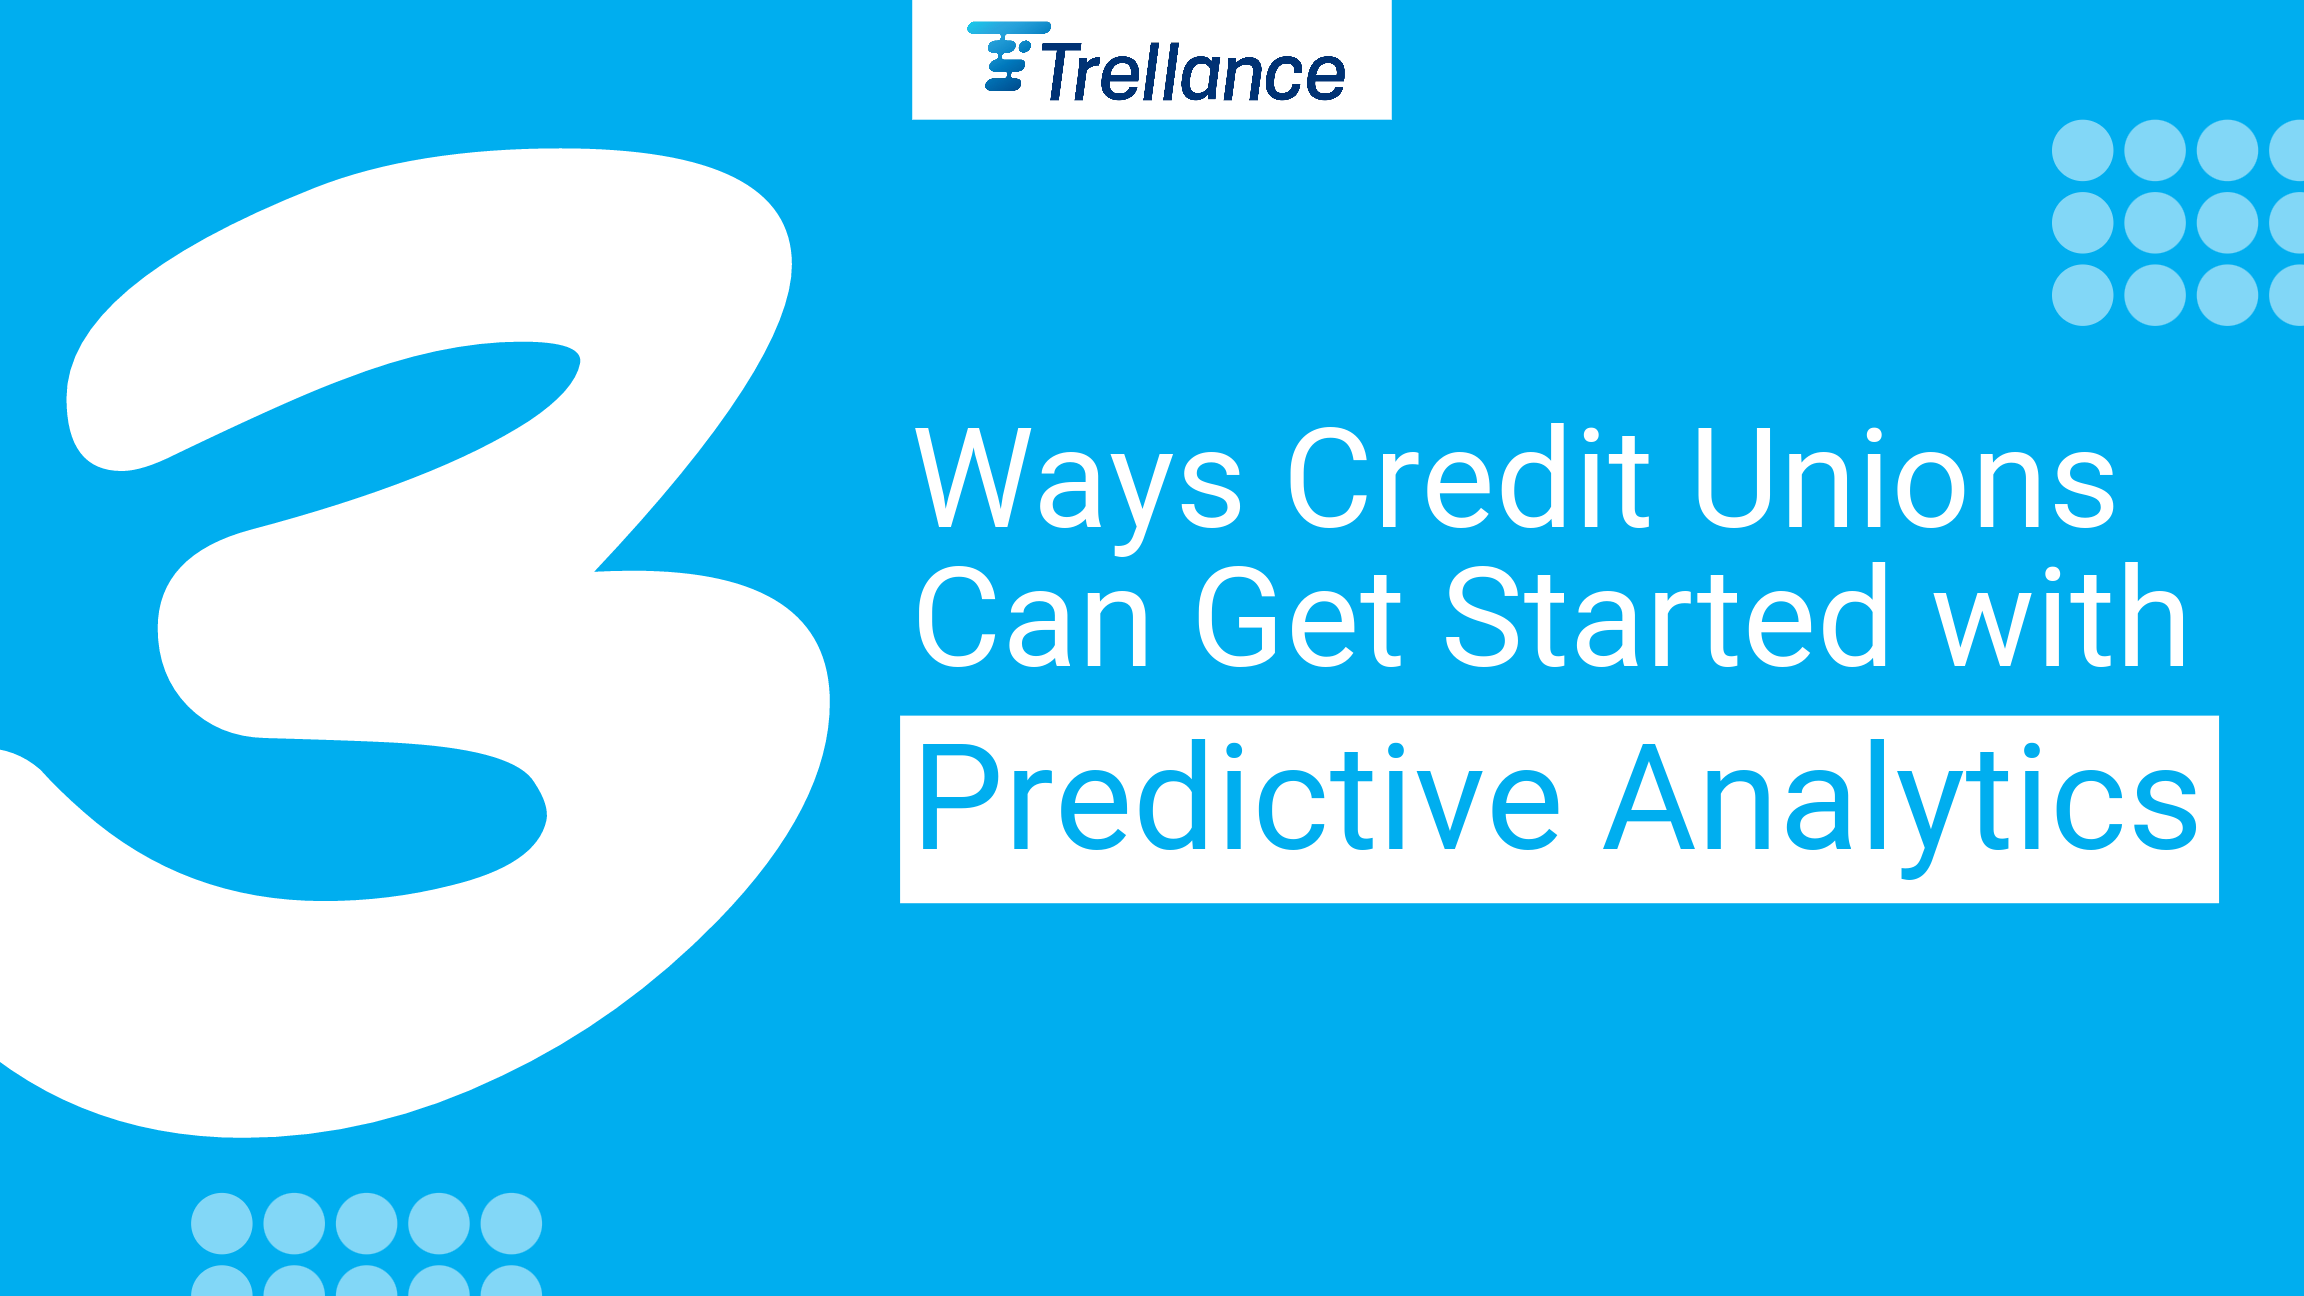 3 Ways Credit Unions Can Get Started with Predictive Analytics